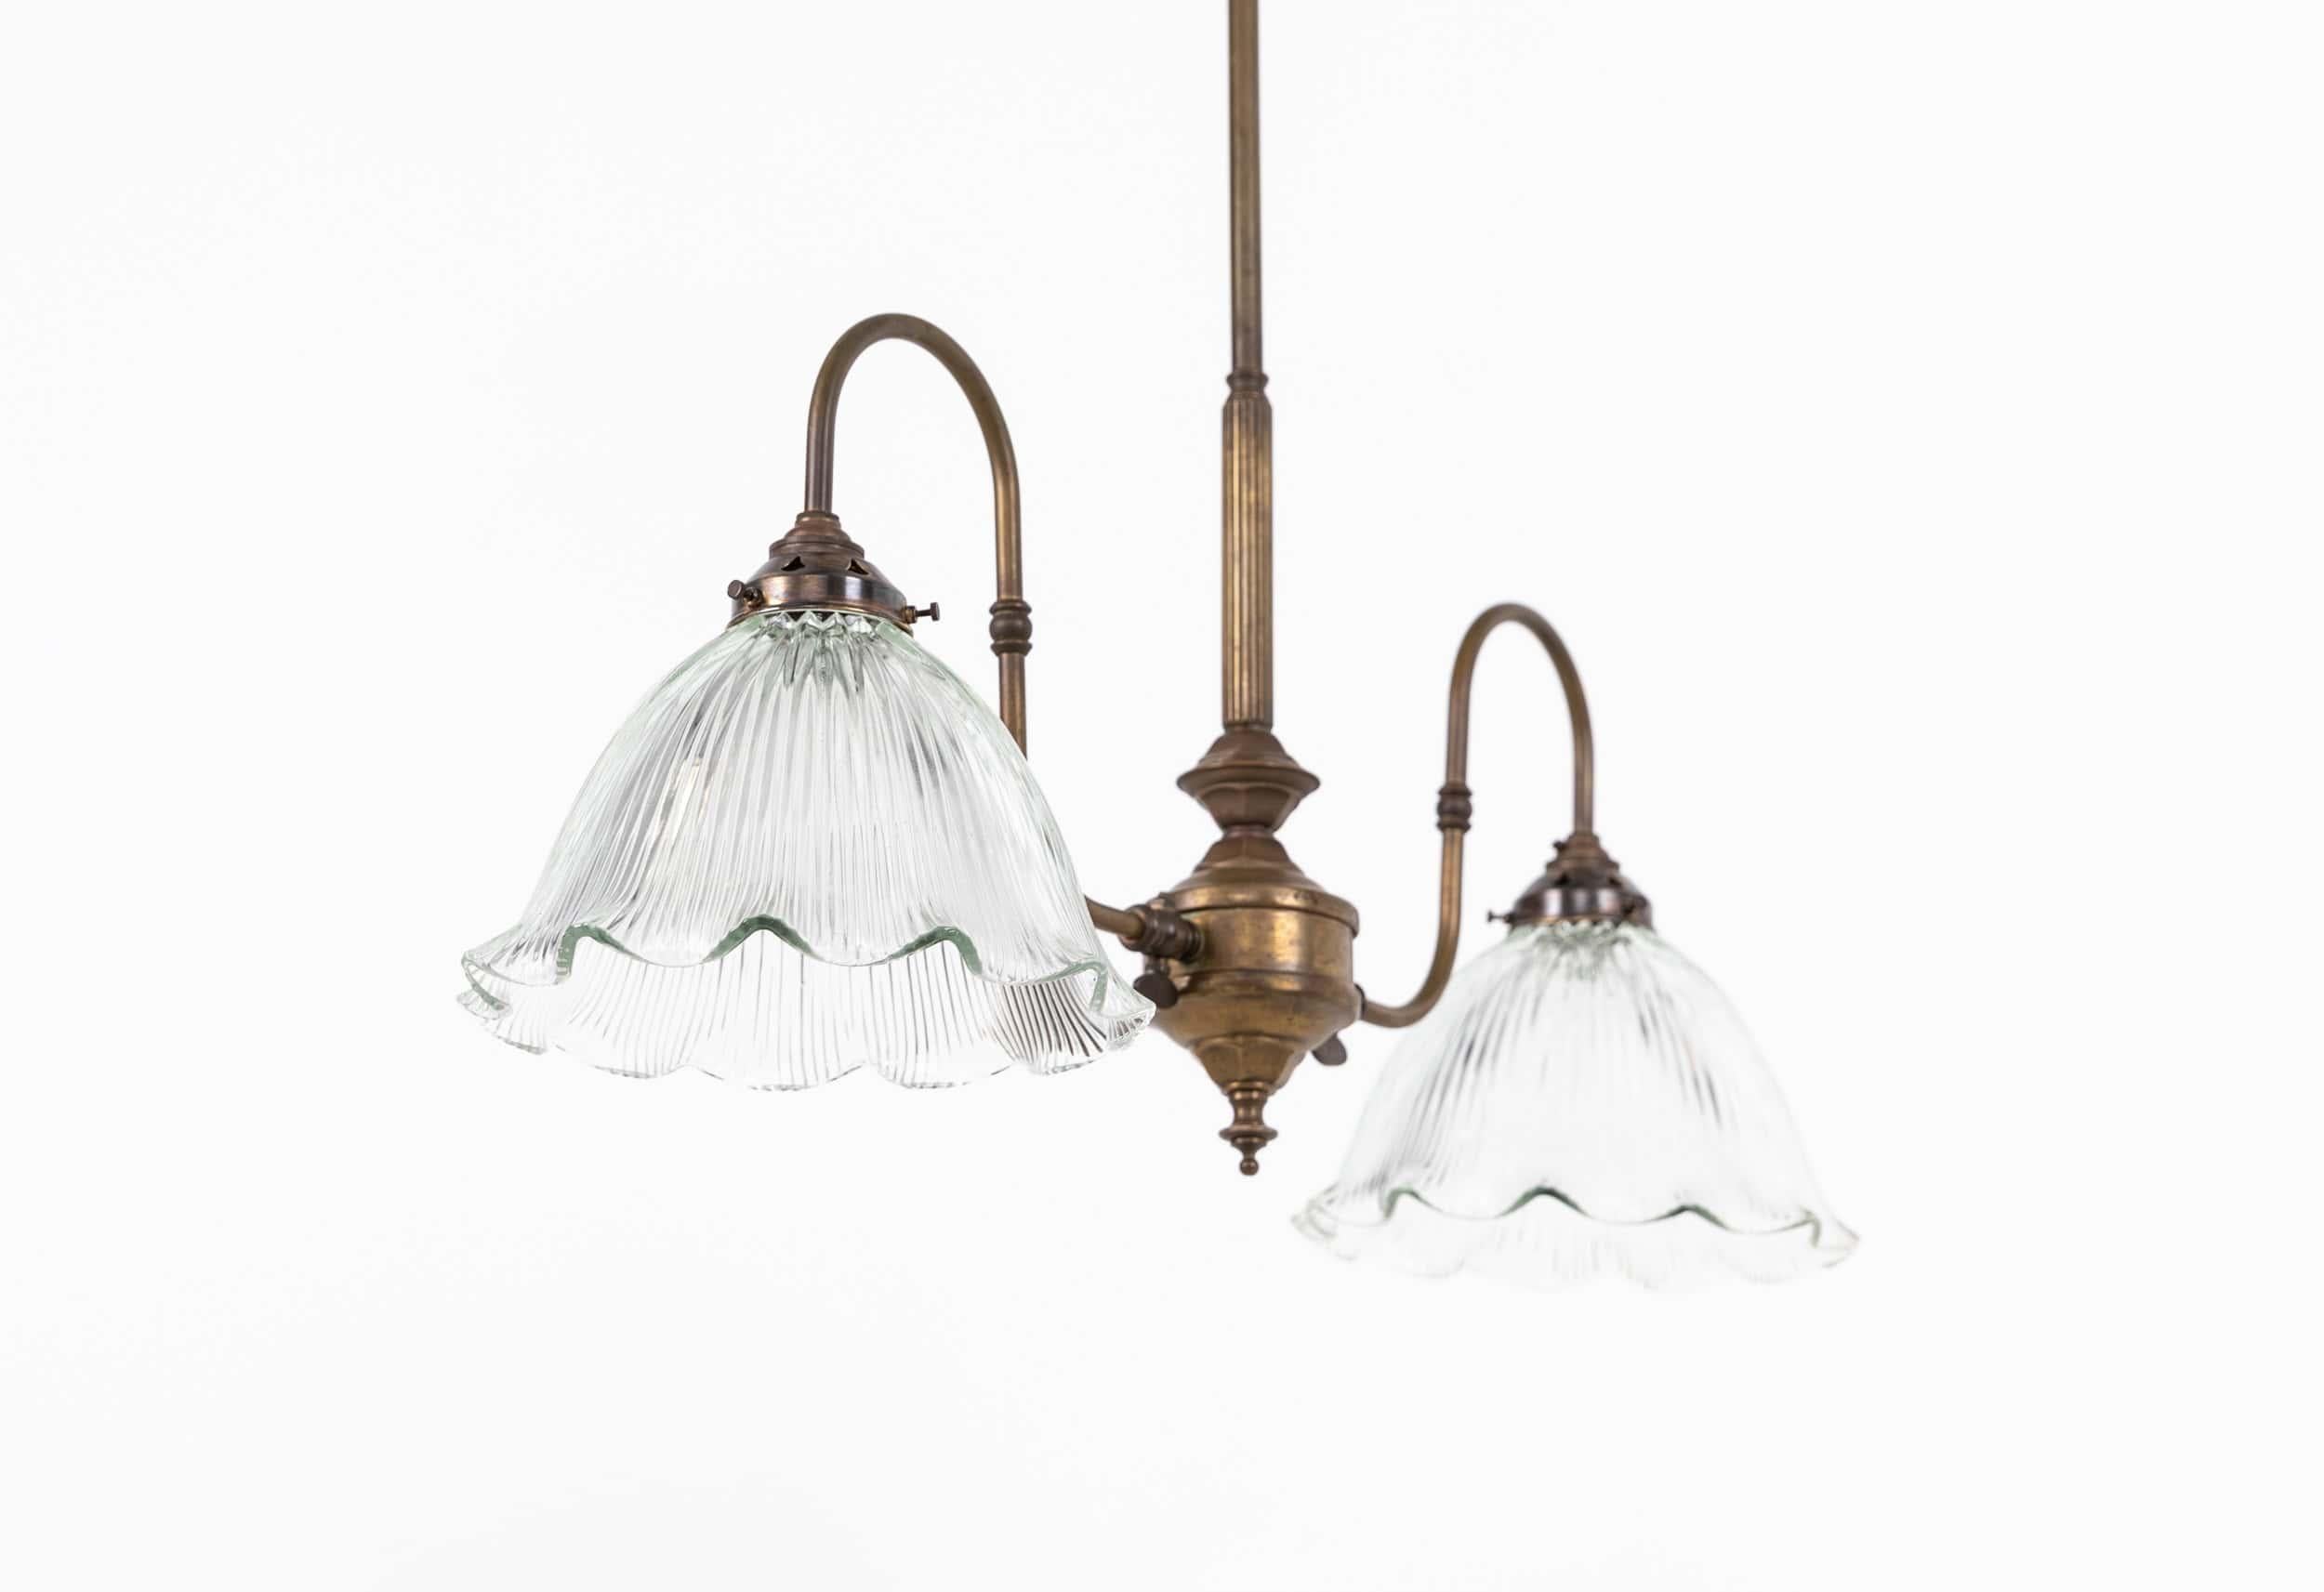 

An elegantly formed brass gasolier with prismatic glass shades. c.1920

Beautifully designed former gasolier, now converted to modern electrics. Complete with Holophane style shades and ceiling hook.
